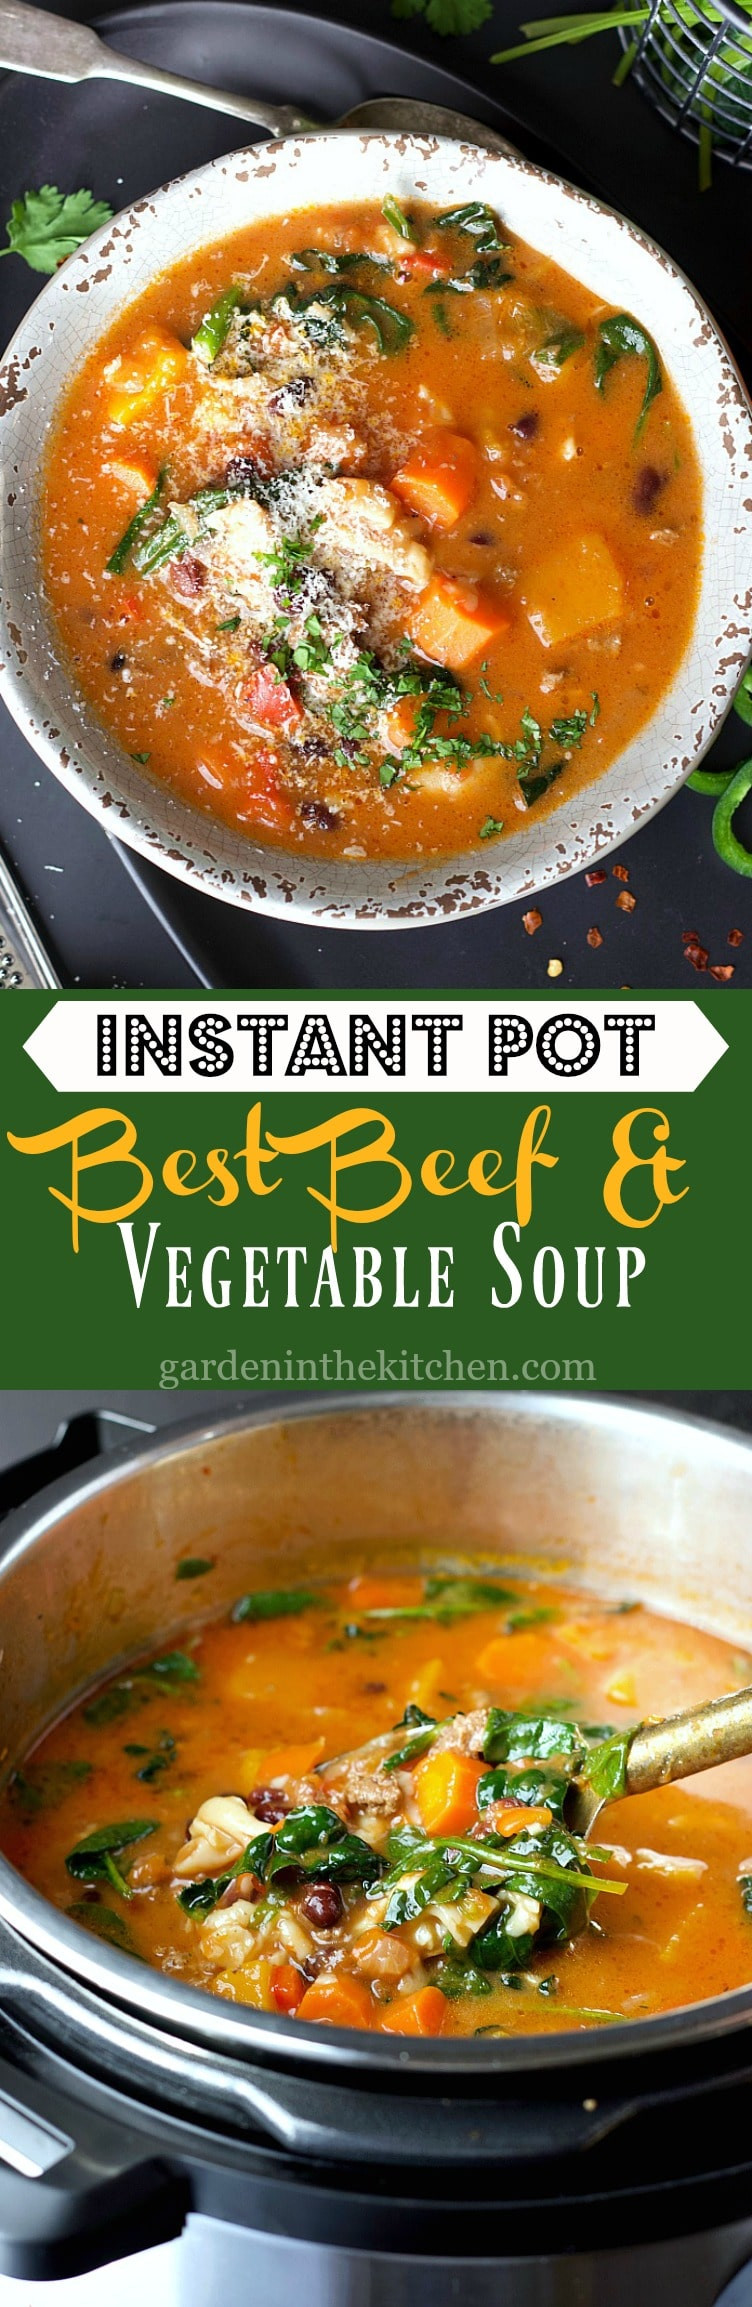 Instant Pot Beef Soup Recipes
 Instant Pot Beef and Ve able Soup